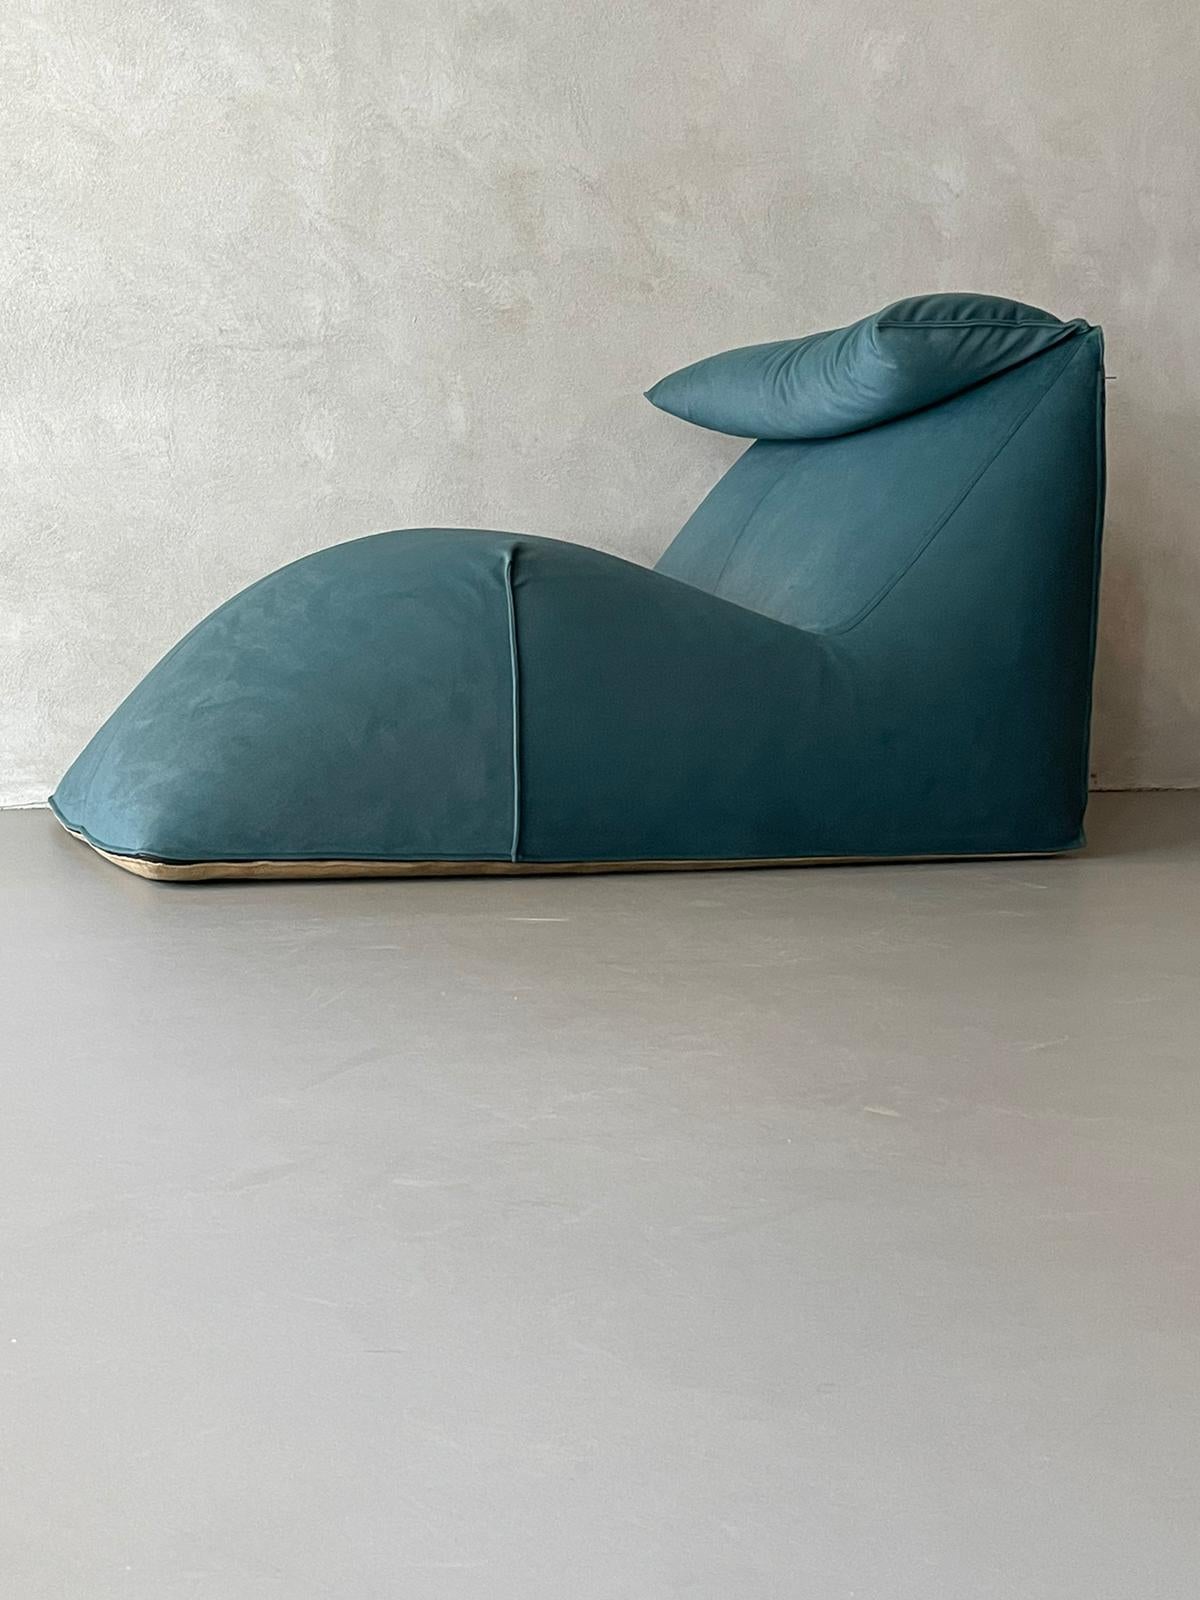 Manufactured by B&B Italy, 1979.
Steel tubular internal frame, shaped polyurethane padding, new upholstering in petrol green fabric

Le Bambole, are icons of the 70s. What makes them special is the apparent absence of a supporting structure, the